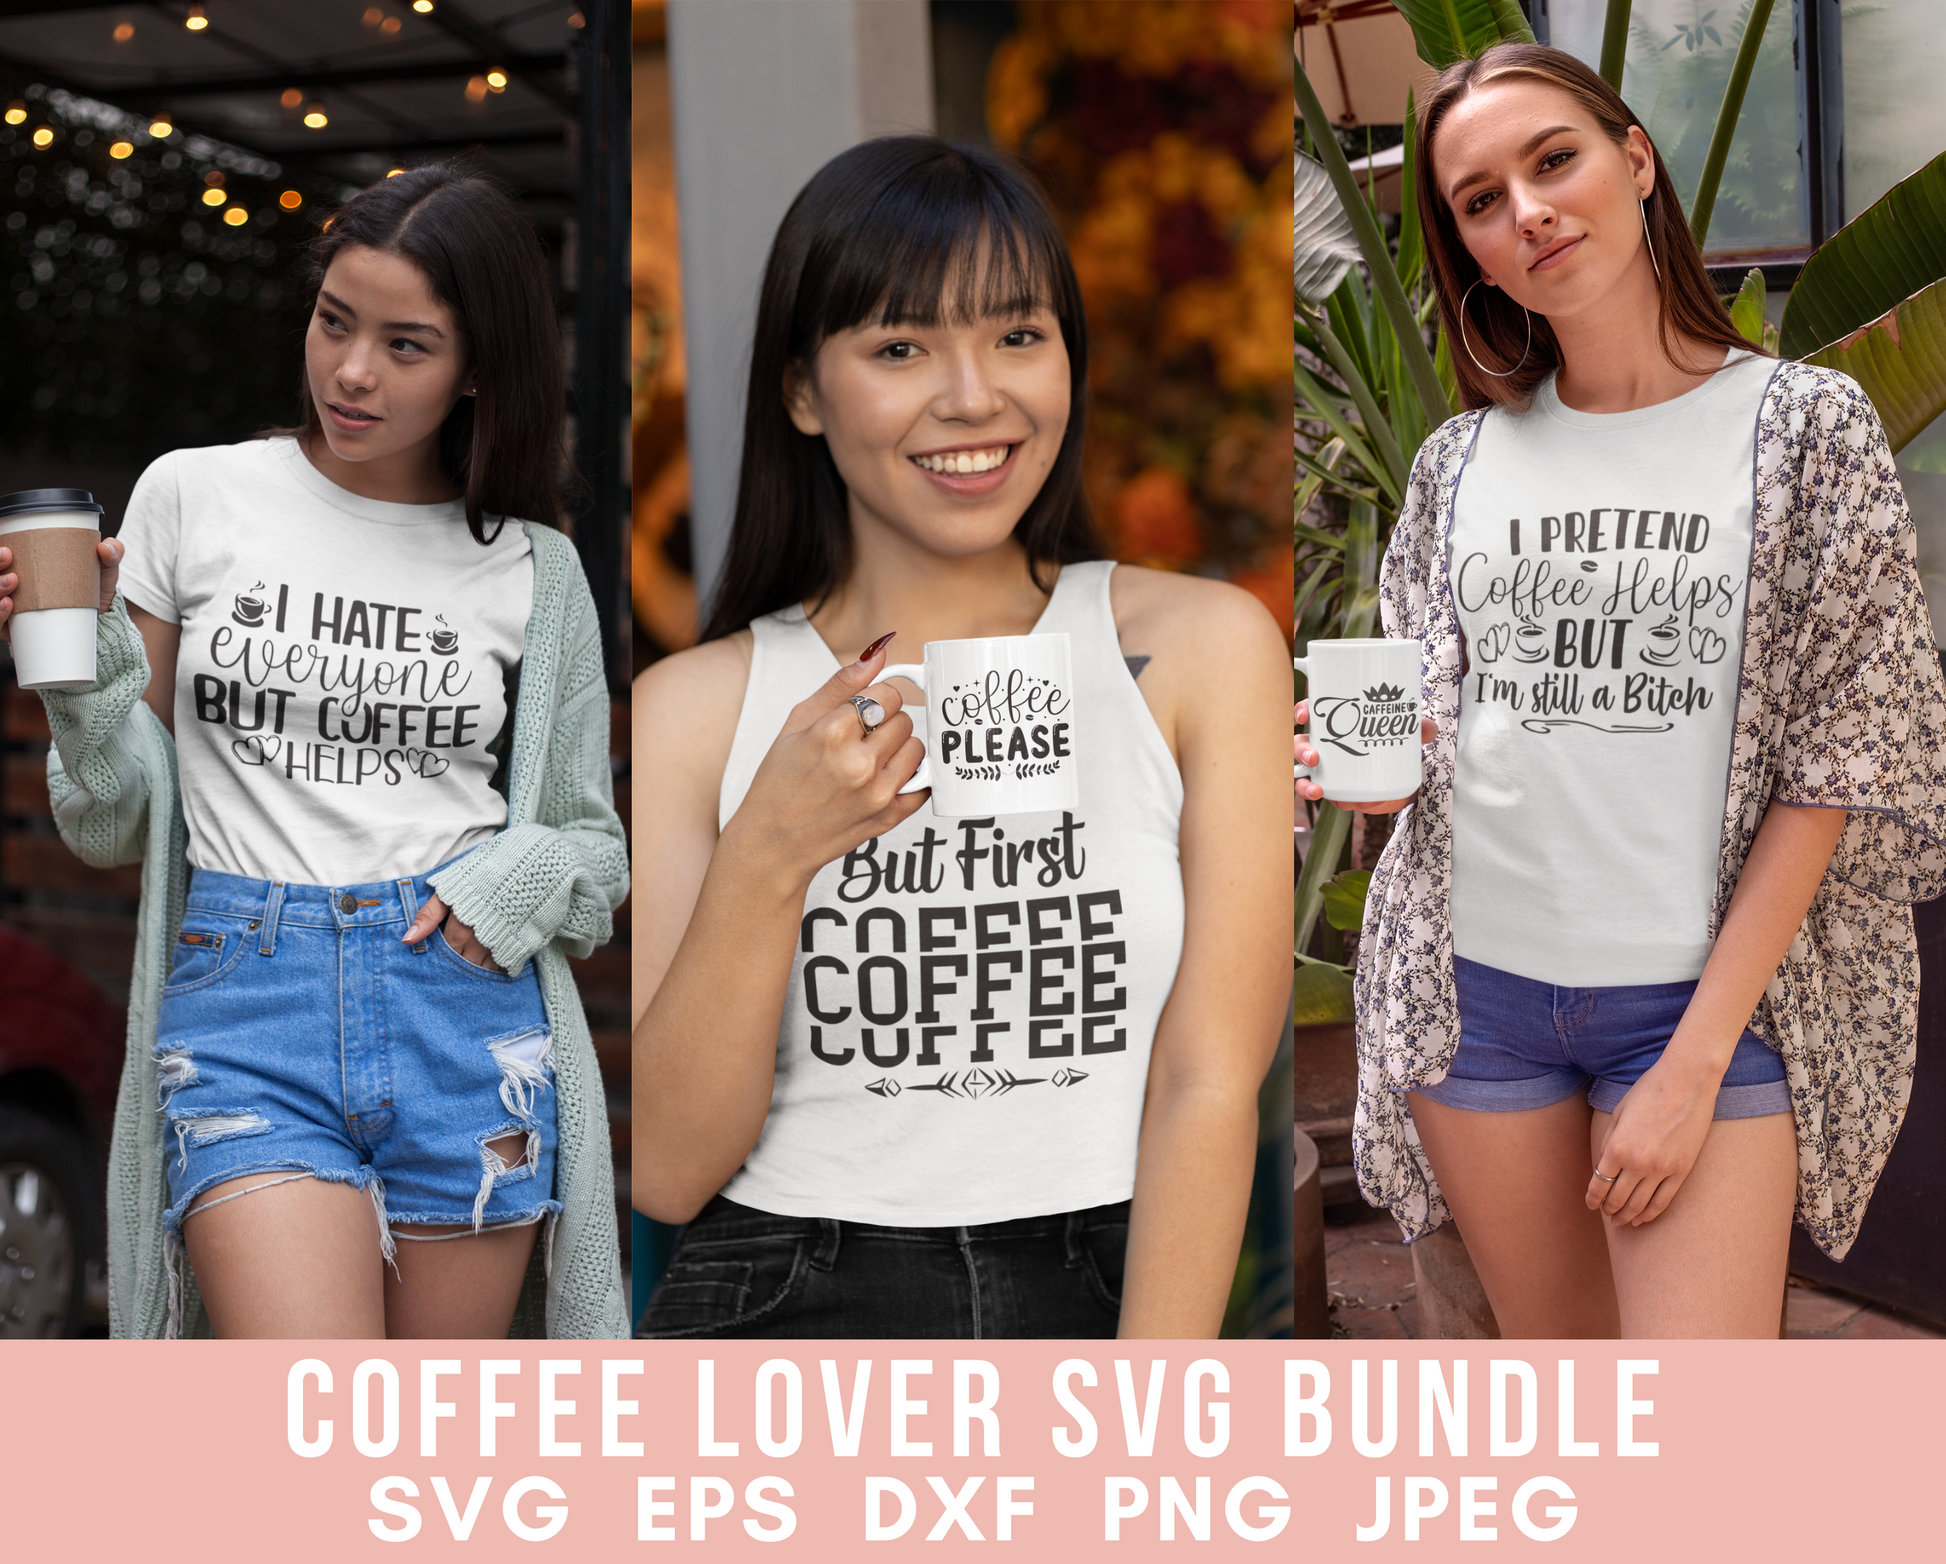 BUY 4 GET 50% OFF 32 Coffee Quotes svg Bundle dxf png coffee mug design svg  glowforge laser cut files coffee svg sayings cut file for cricut